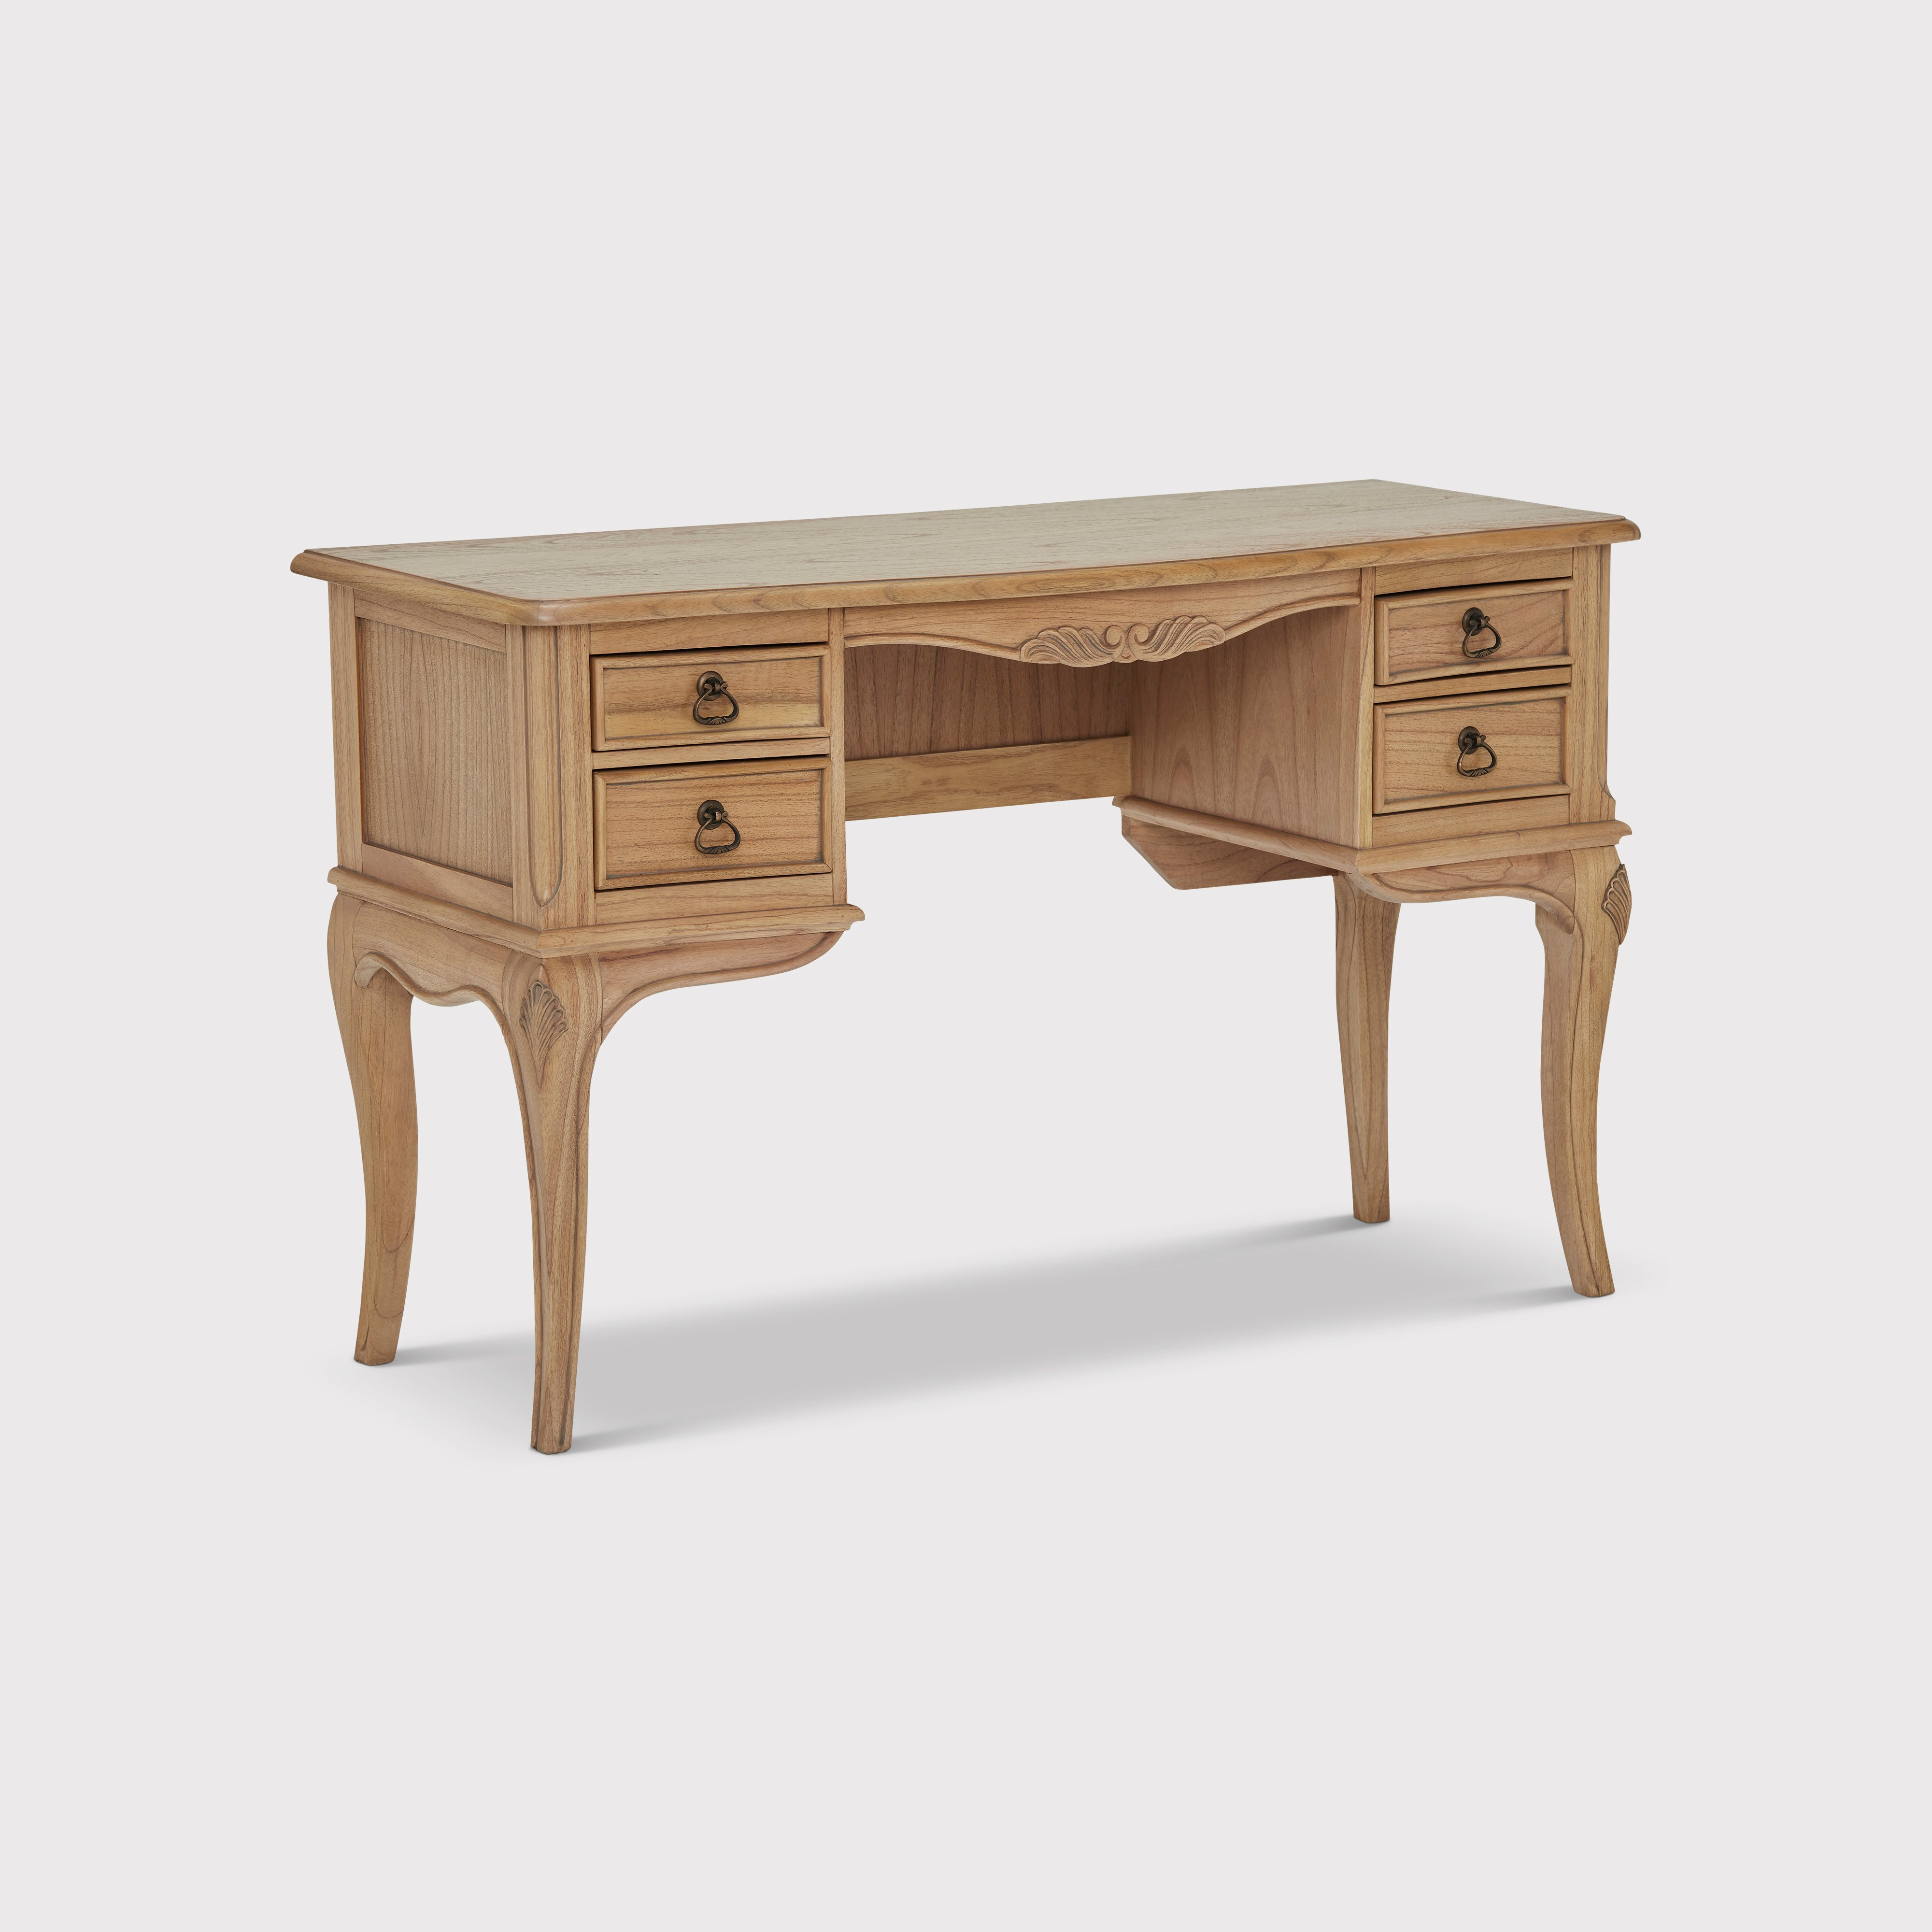 Lille Dressing Table, Neutral Wood - Barker & Stonehouse - image 1